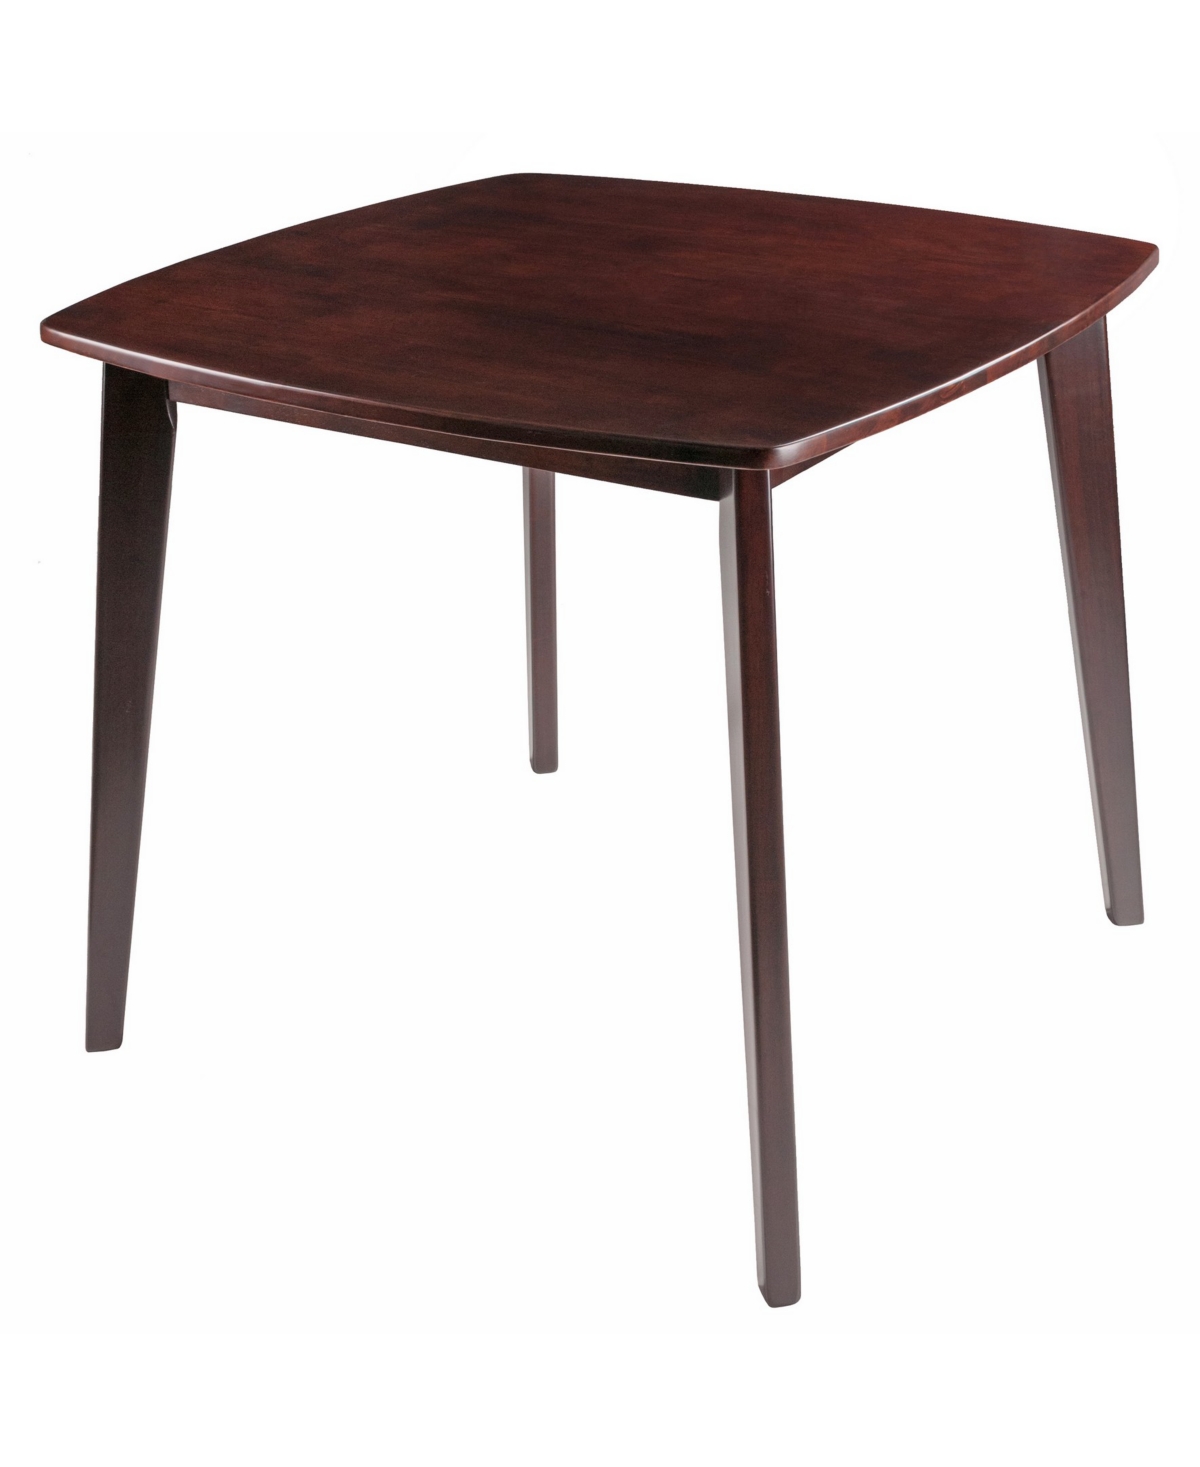 Winsome Pauline 29.33" Wood Dining Table In Walnut